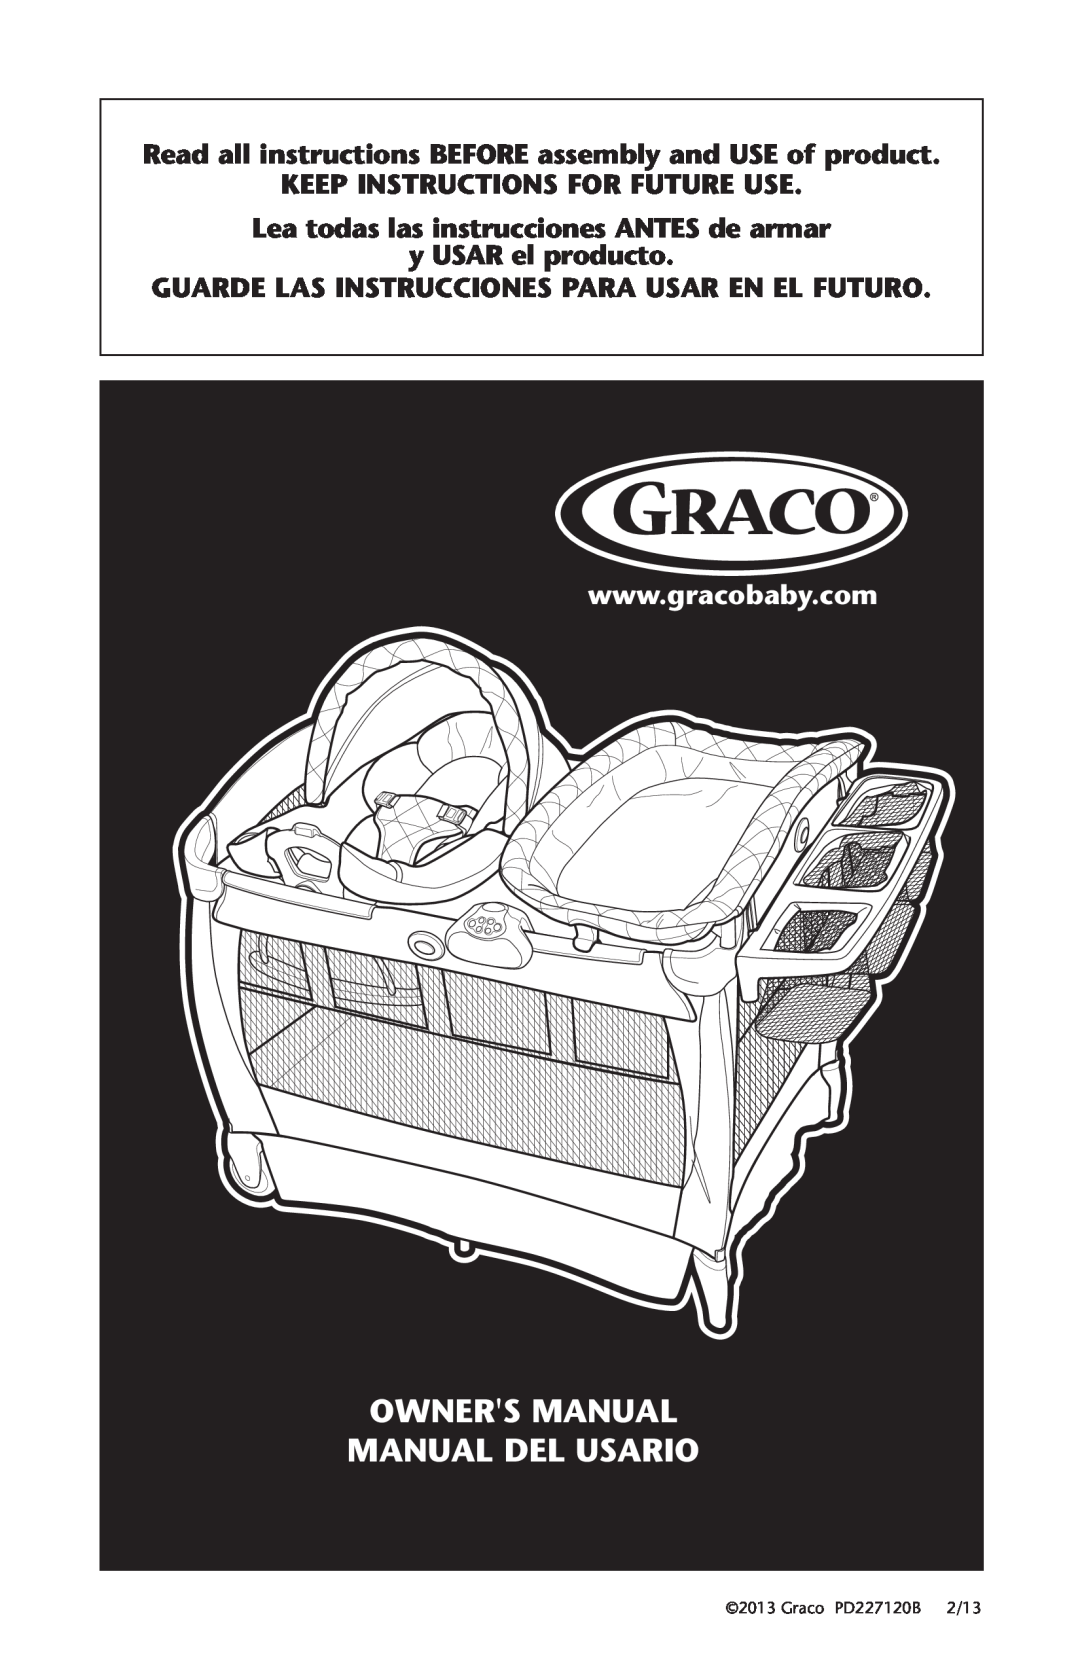 Graco PD227120B owner manual Read all instructions BEFORE assembly and USE of product, Keep Instructions For Future Use 